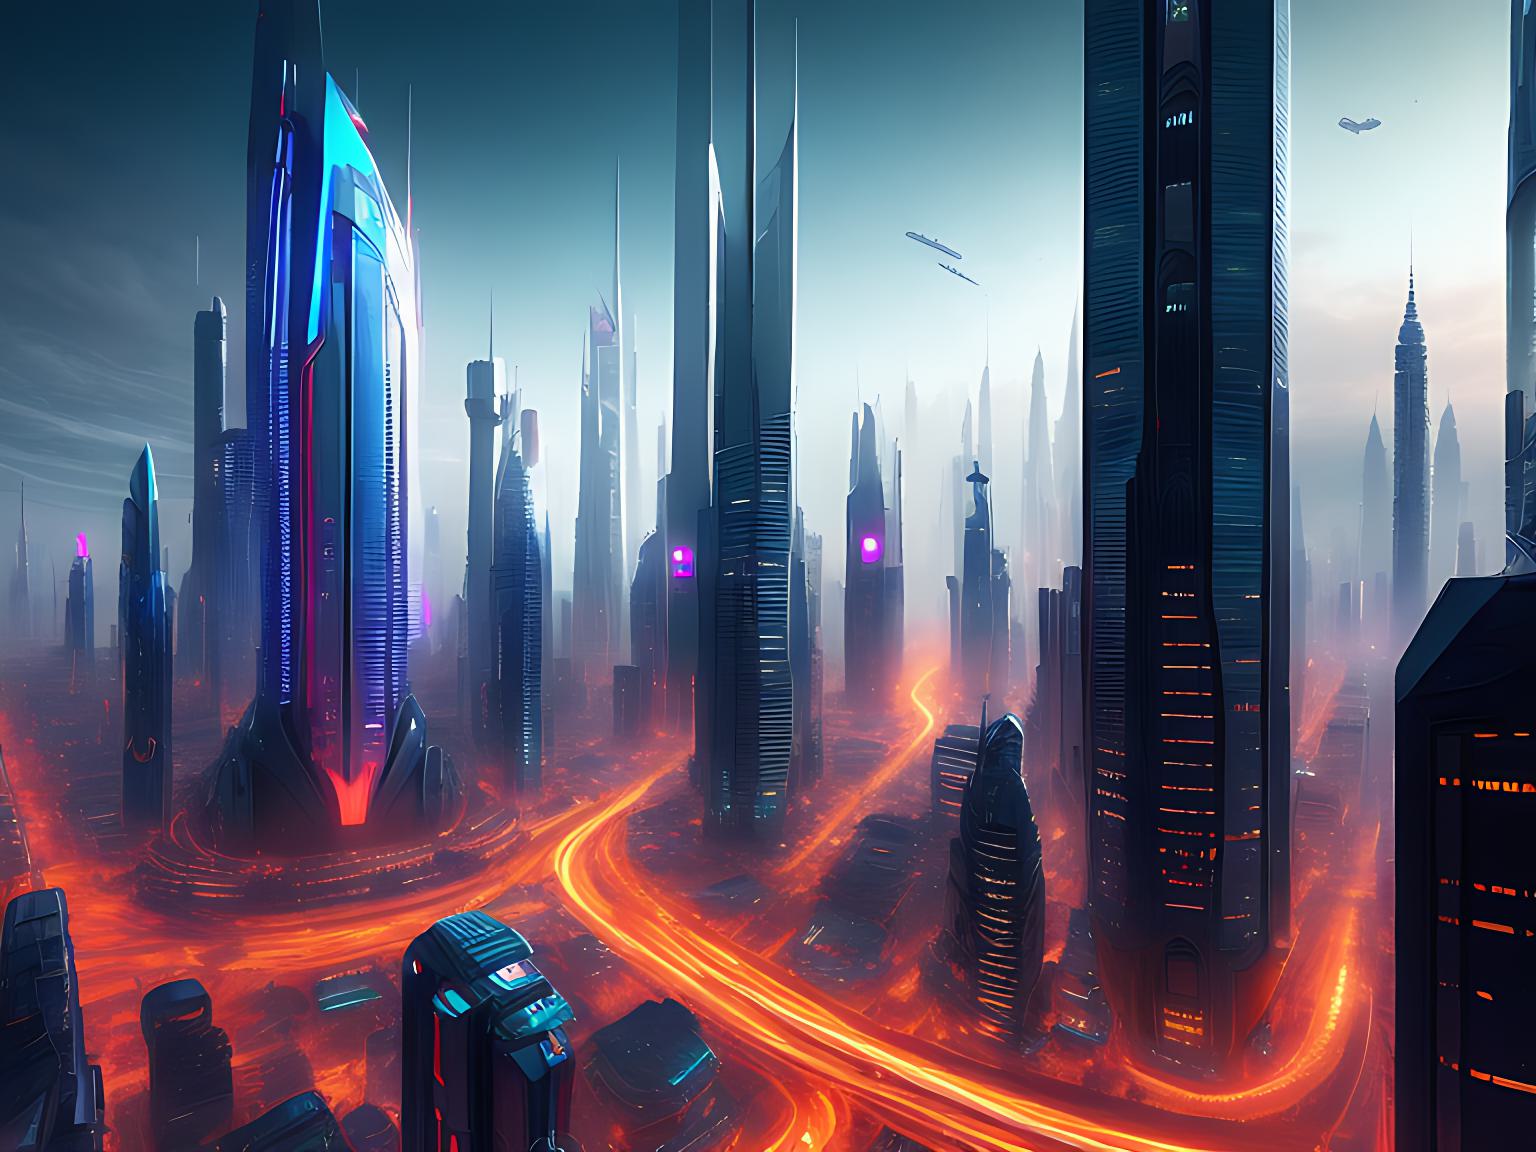 futuristic city panoroma envrionment concept art design made in fotor ai concept art generator from text